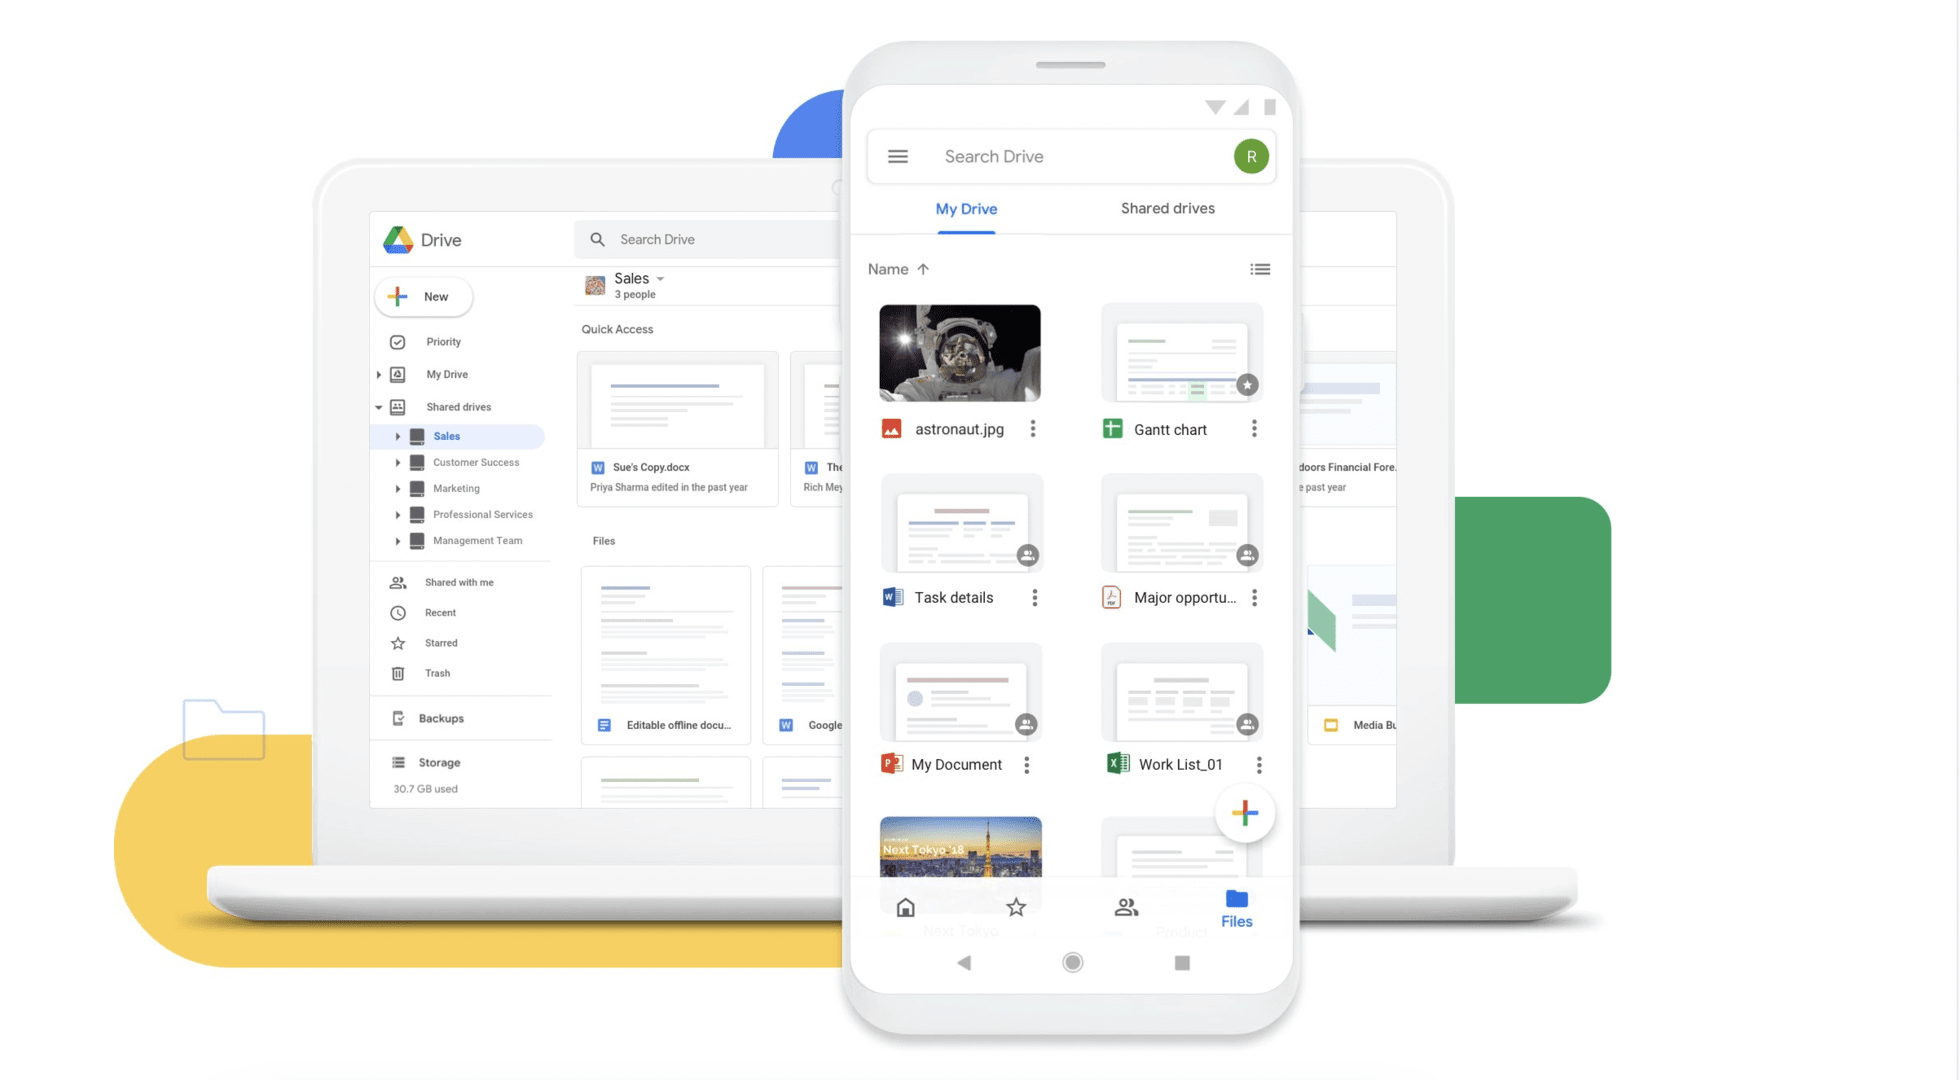 Work from home app - Google Drive